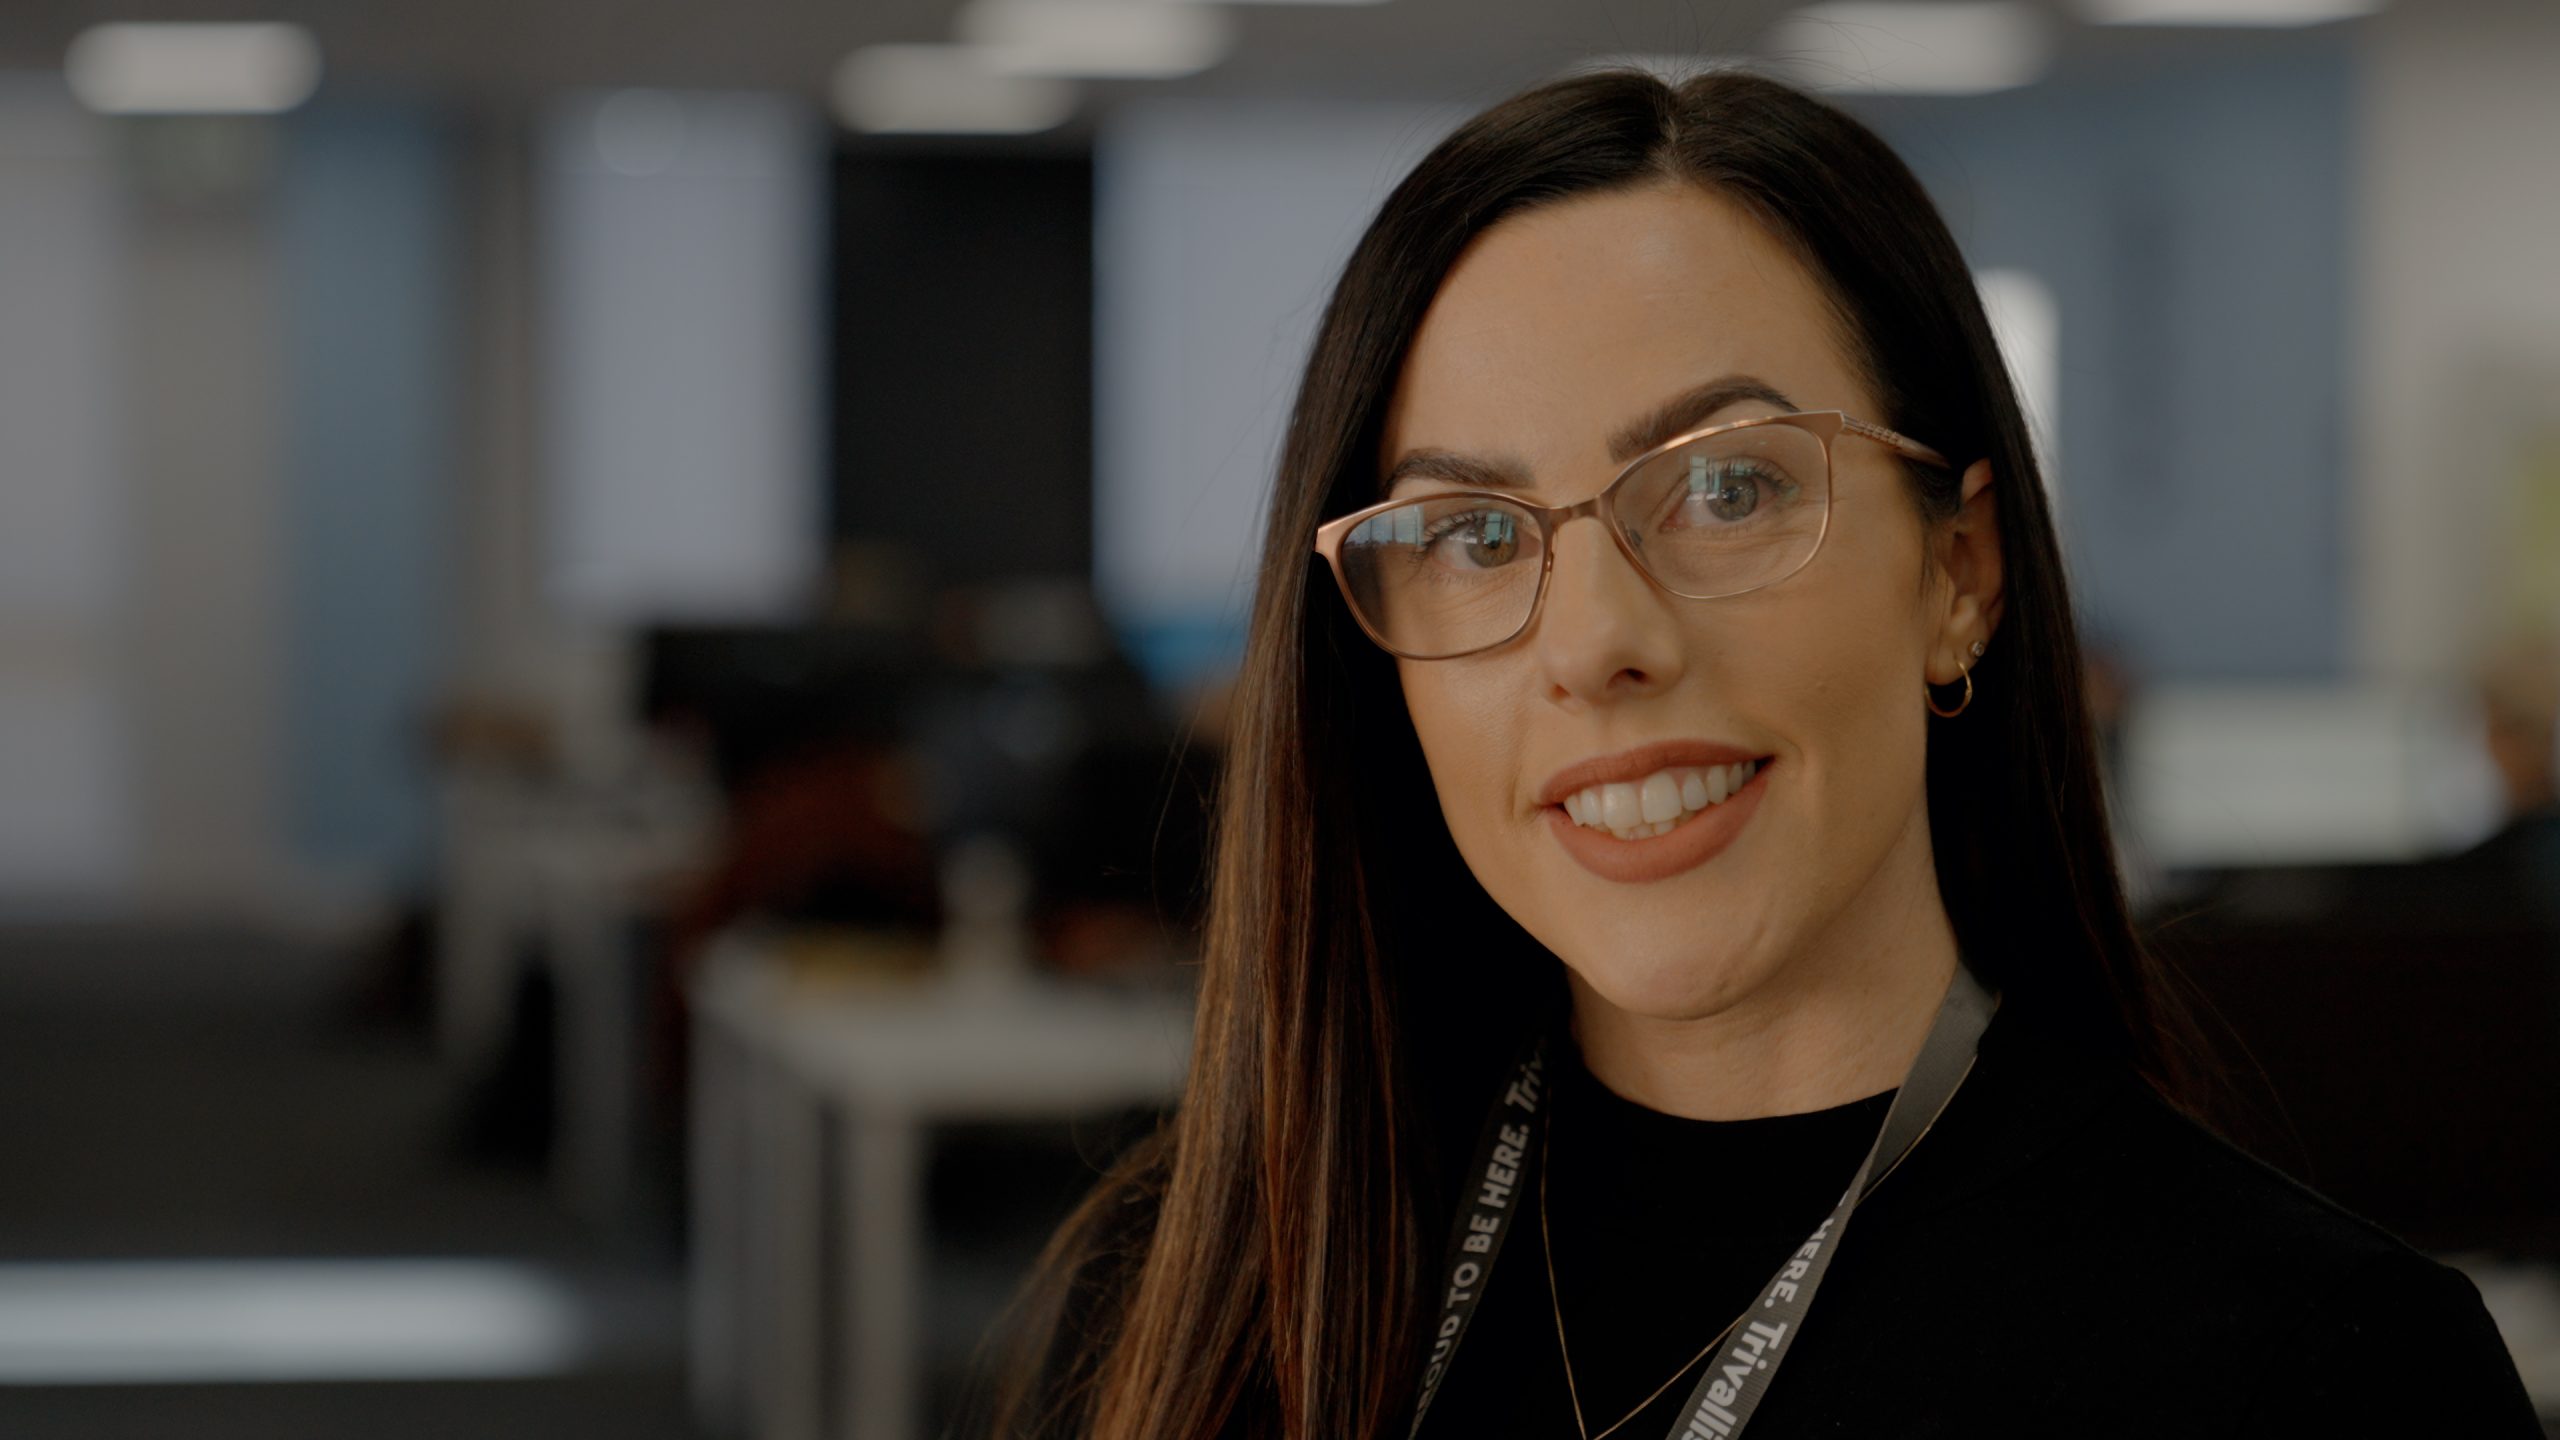 A professional woman with long dark hair and glasses is smiling at the camera. she is wearing a black turtleneck and a lanyard. the background shows a blurred office space with desks and computers.